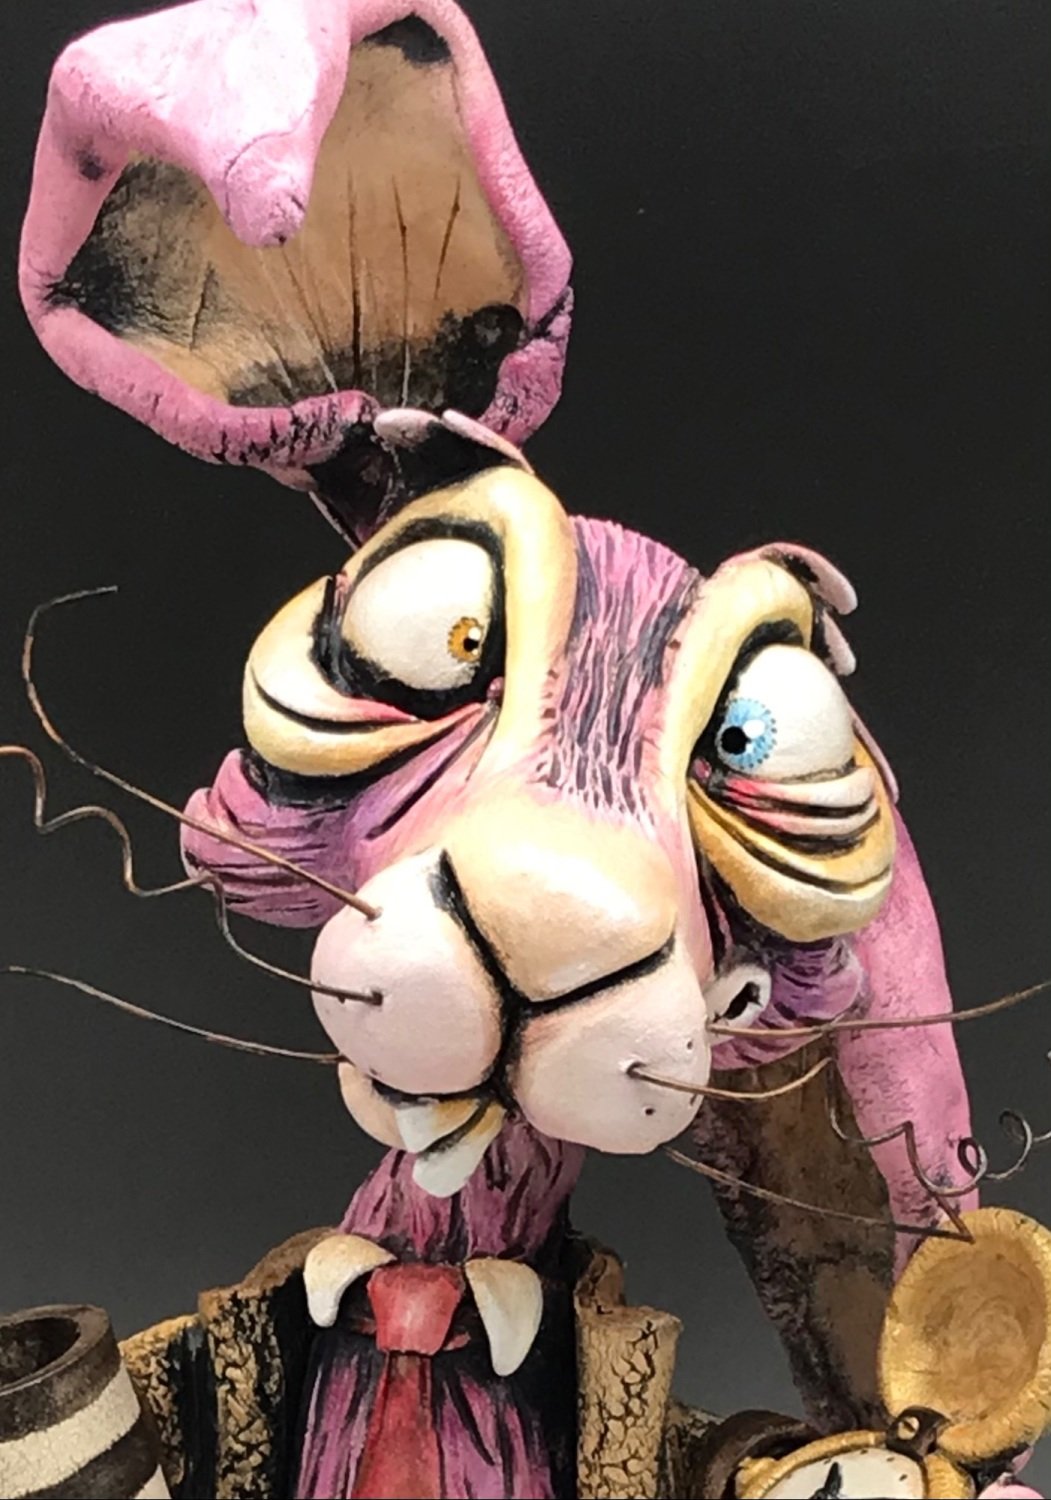 Blair the Mad March Hare Sculpture